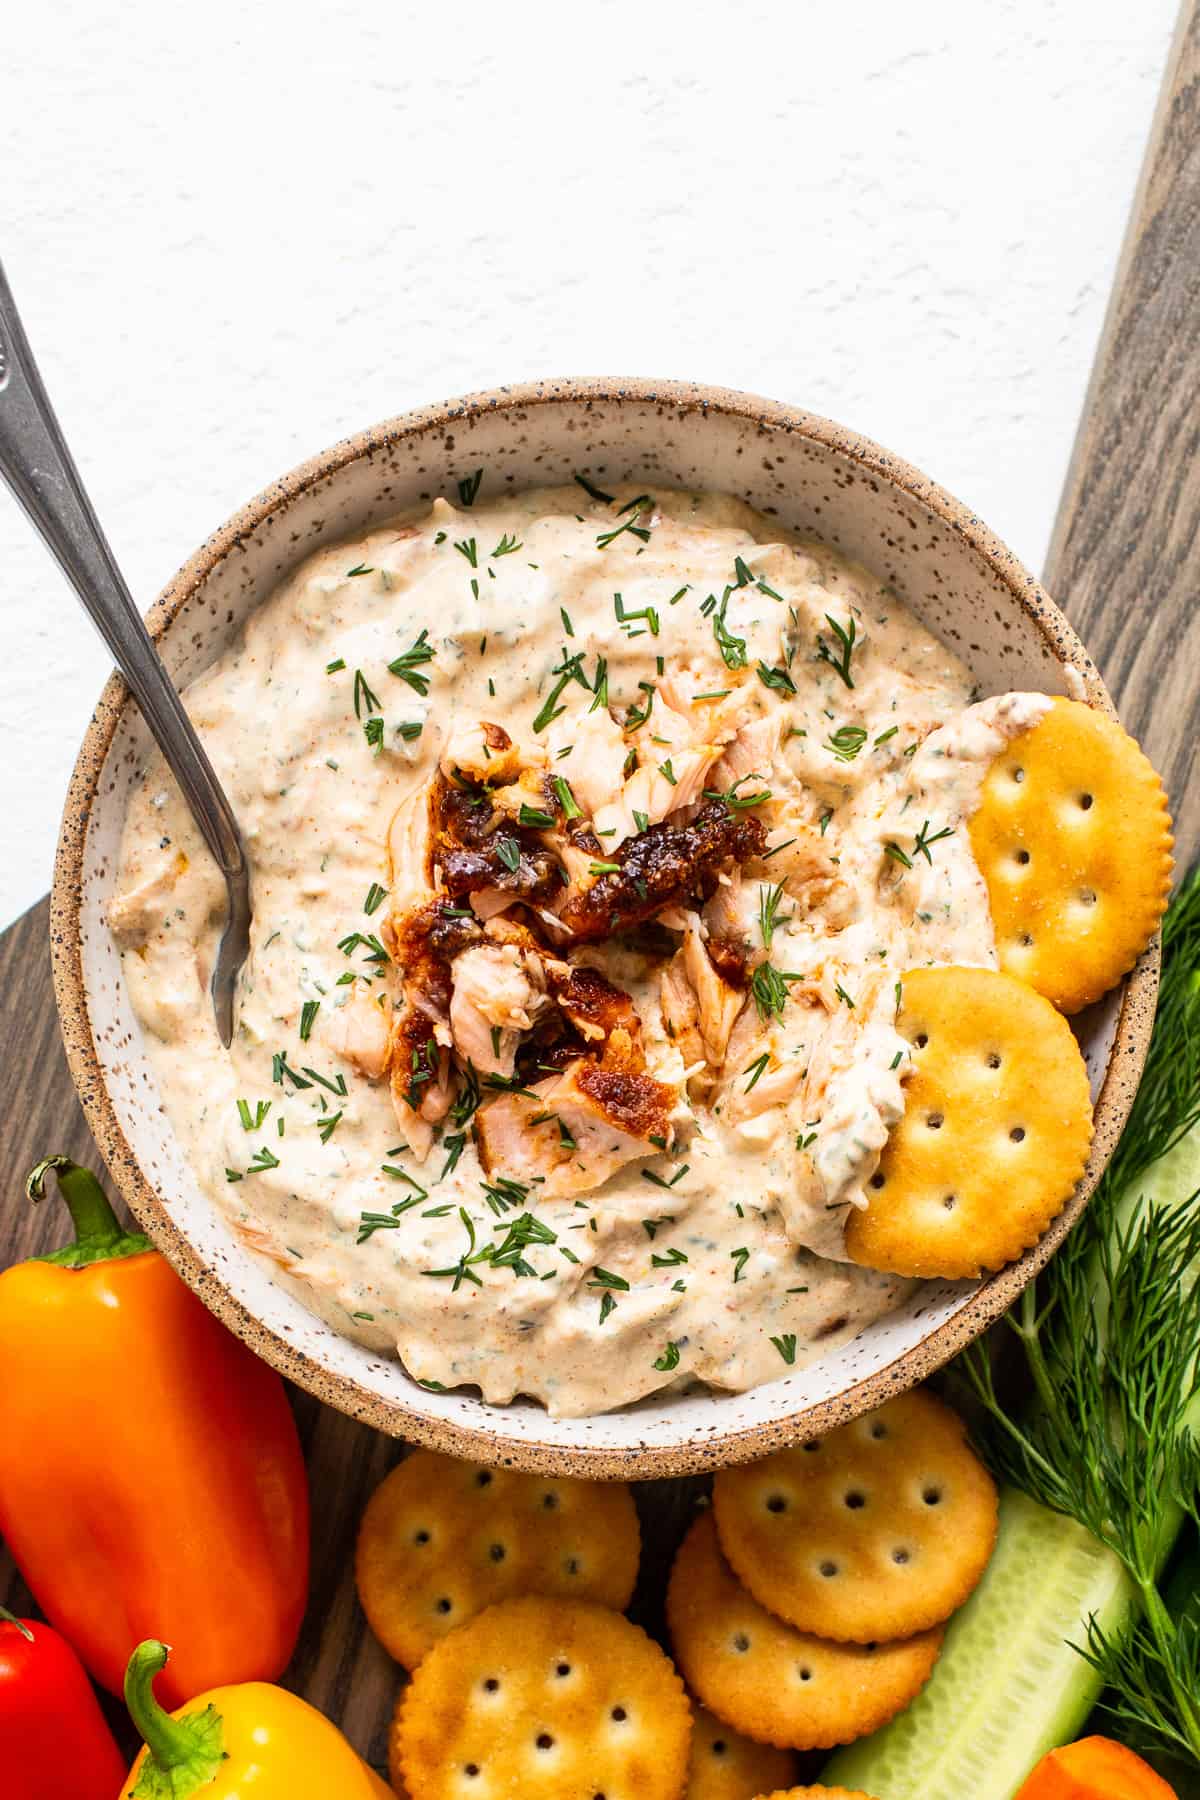 Smoked salmon dip in a bowl.